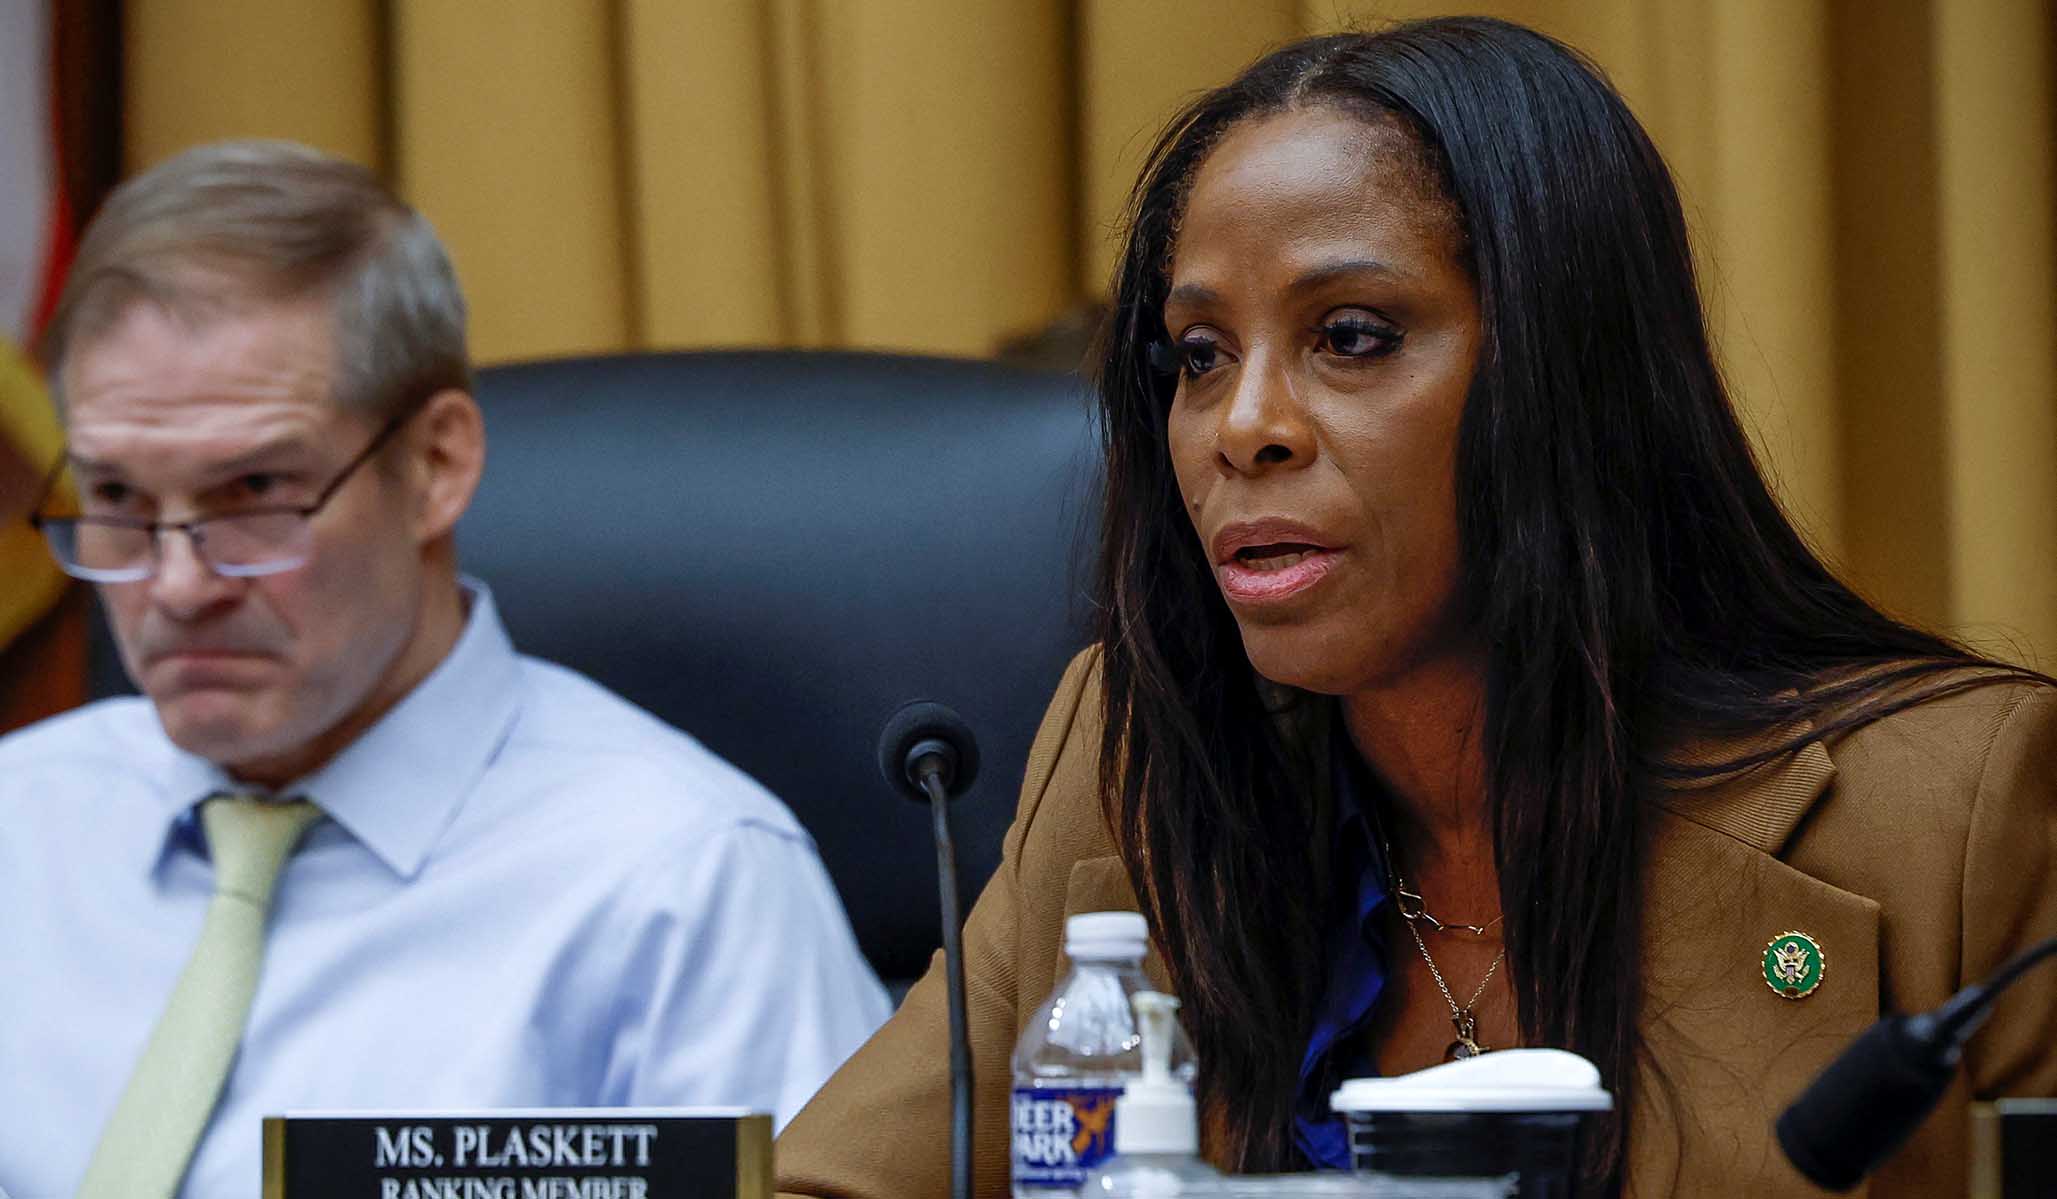 Rep. Stacey Plaskett (D., Virgin Islands) questions a witness while Rep. Jim Jordan (R., Ohio) looks on, on Capitol Hill in Washington, D.C., February 9, 2023.(Evelyn Hockstein/Reuters)